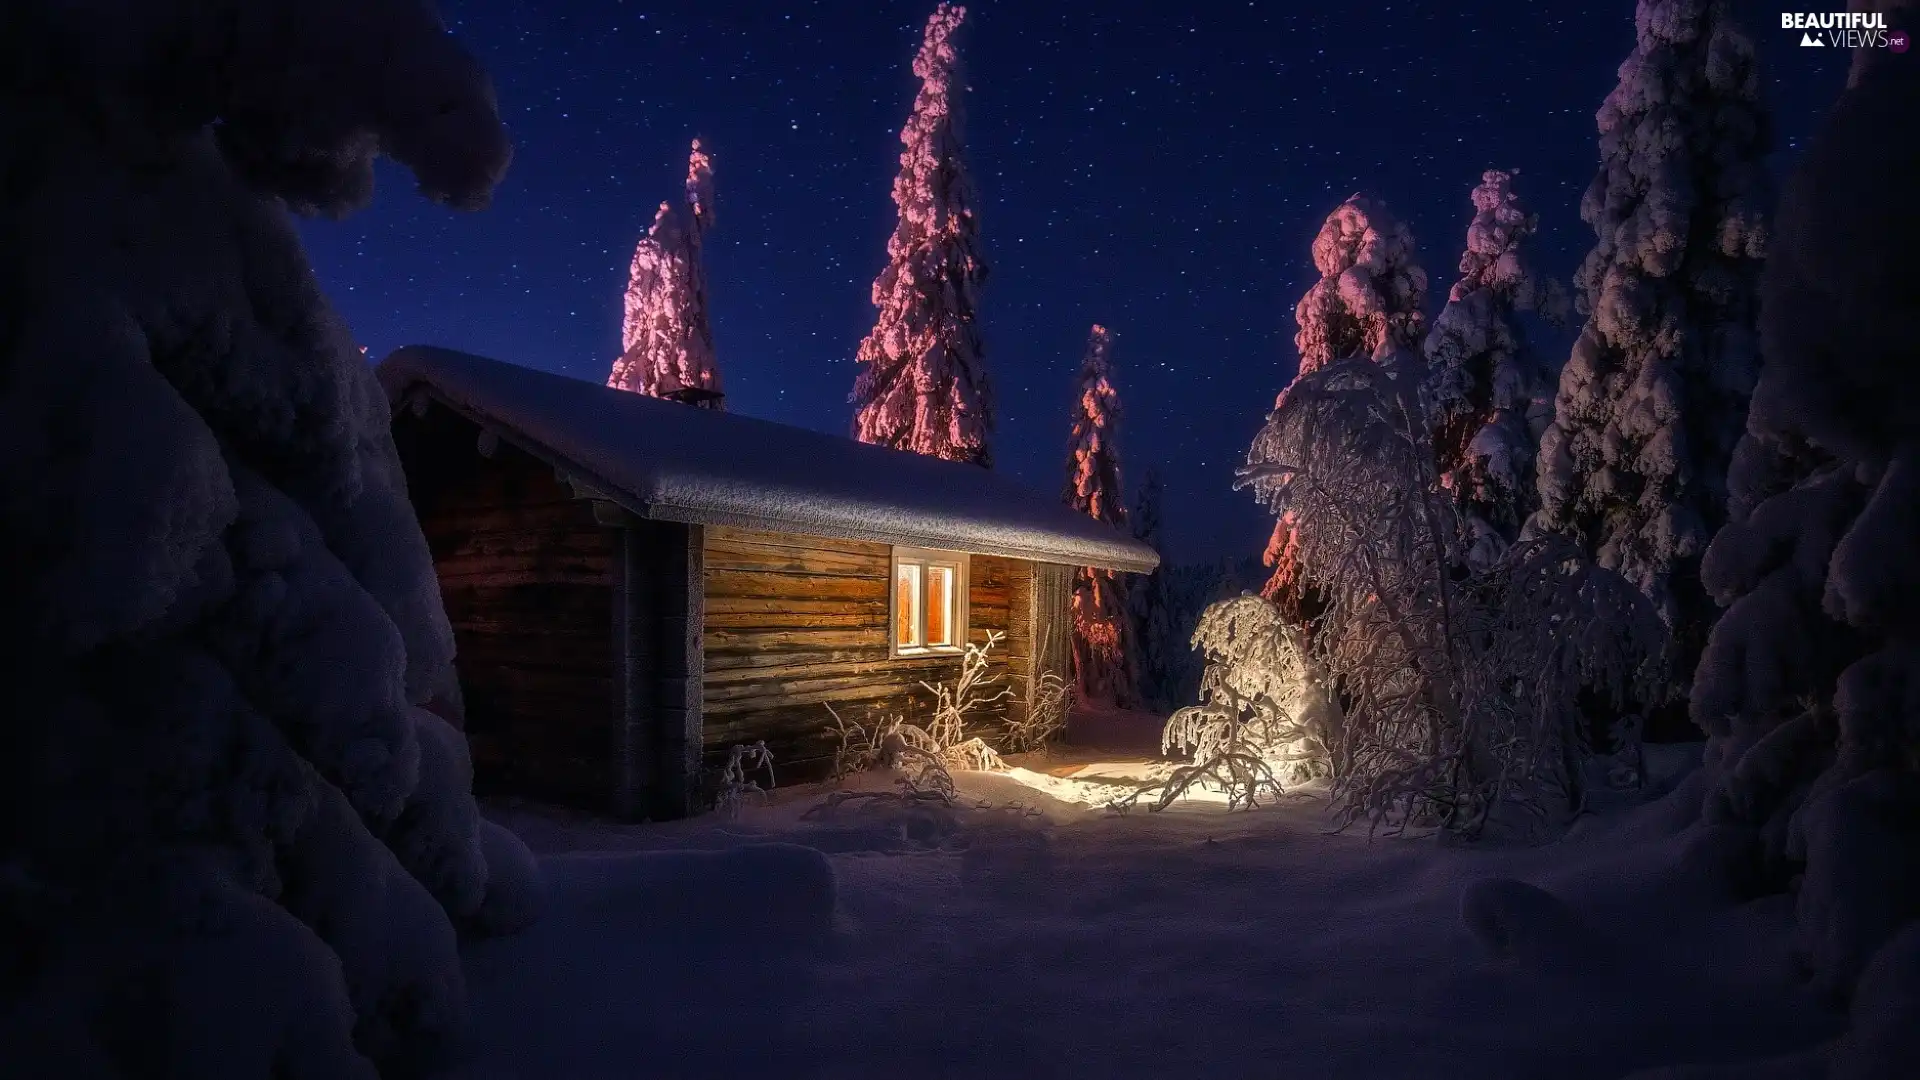 Snowy, trees, Home, viewes, wooden, Night, winter, Floodlit